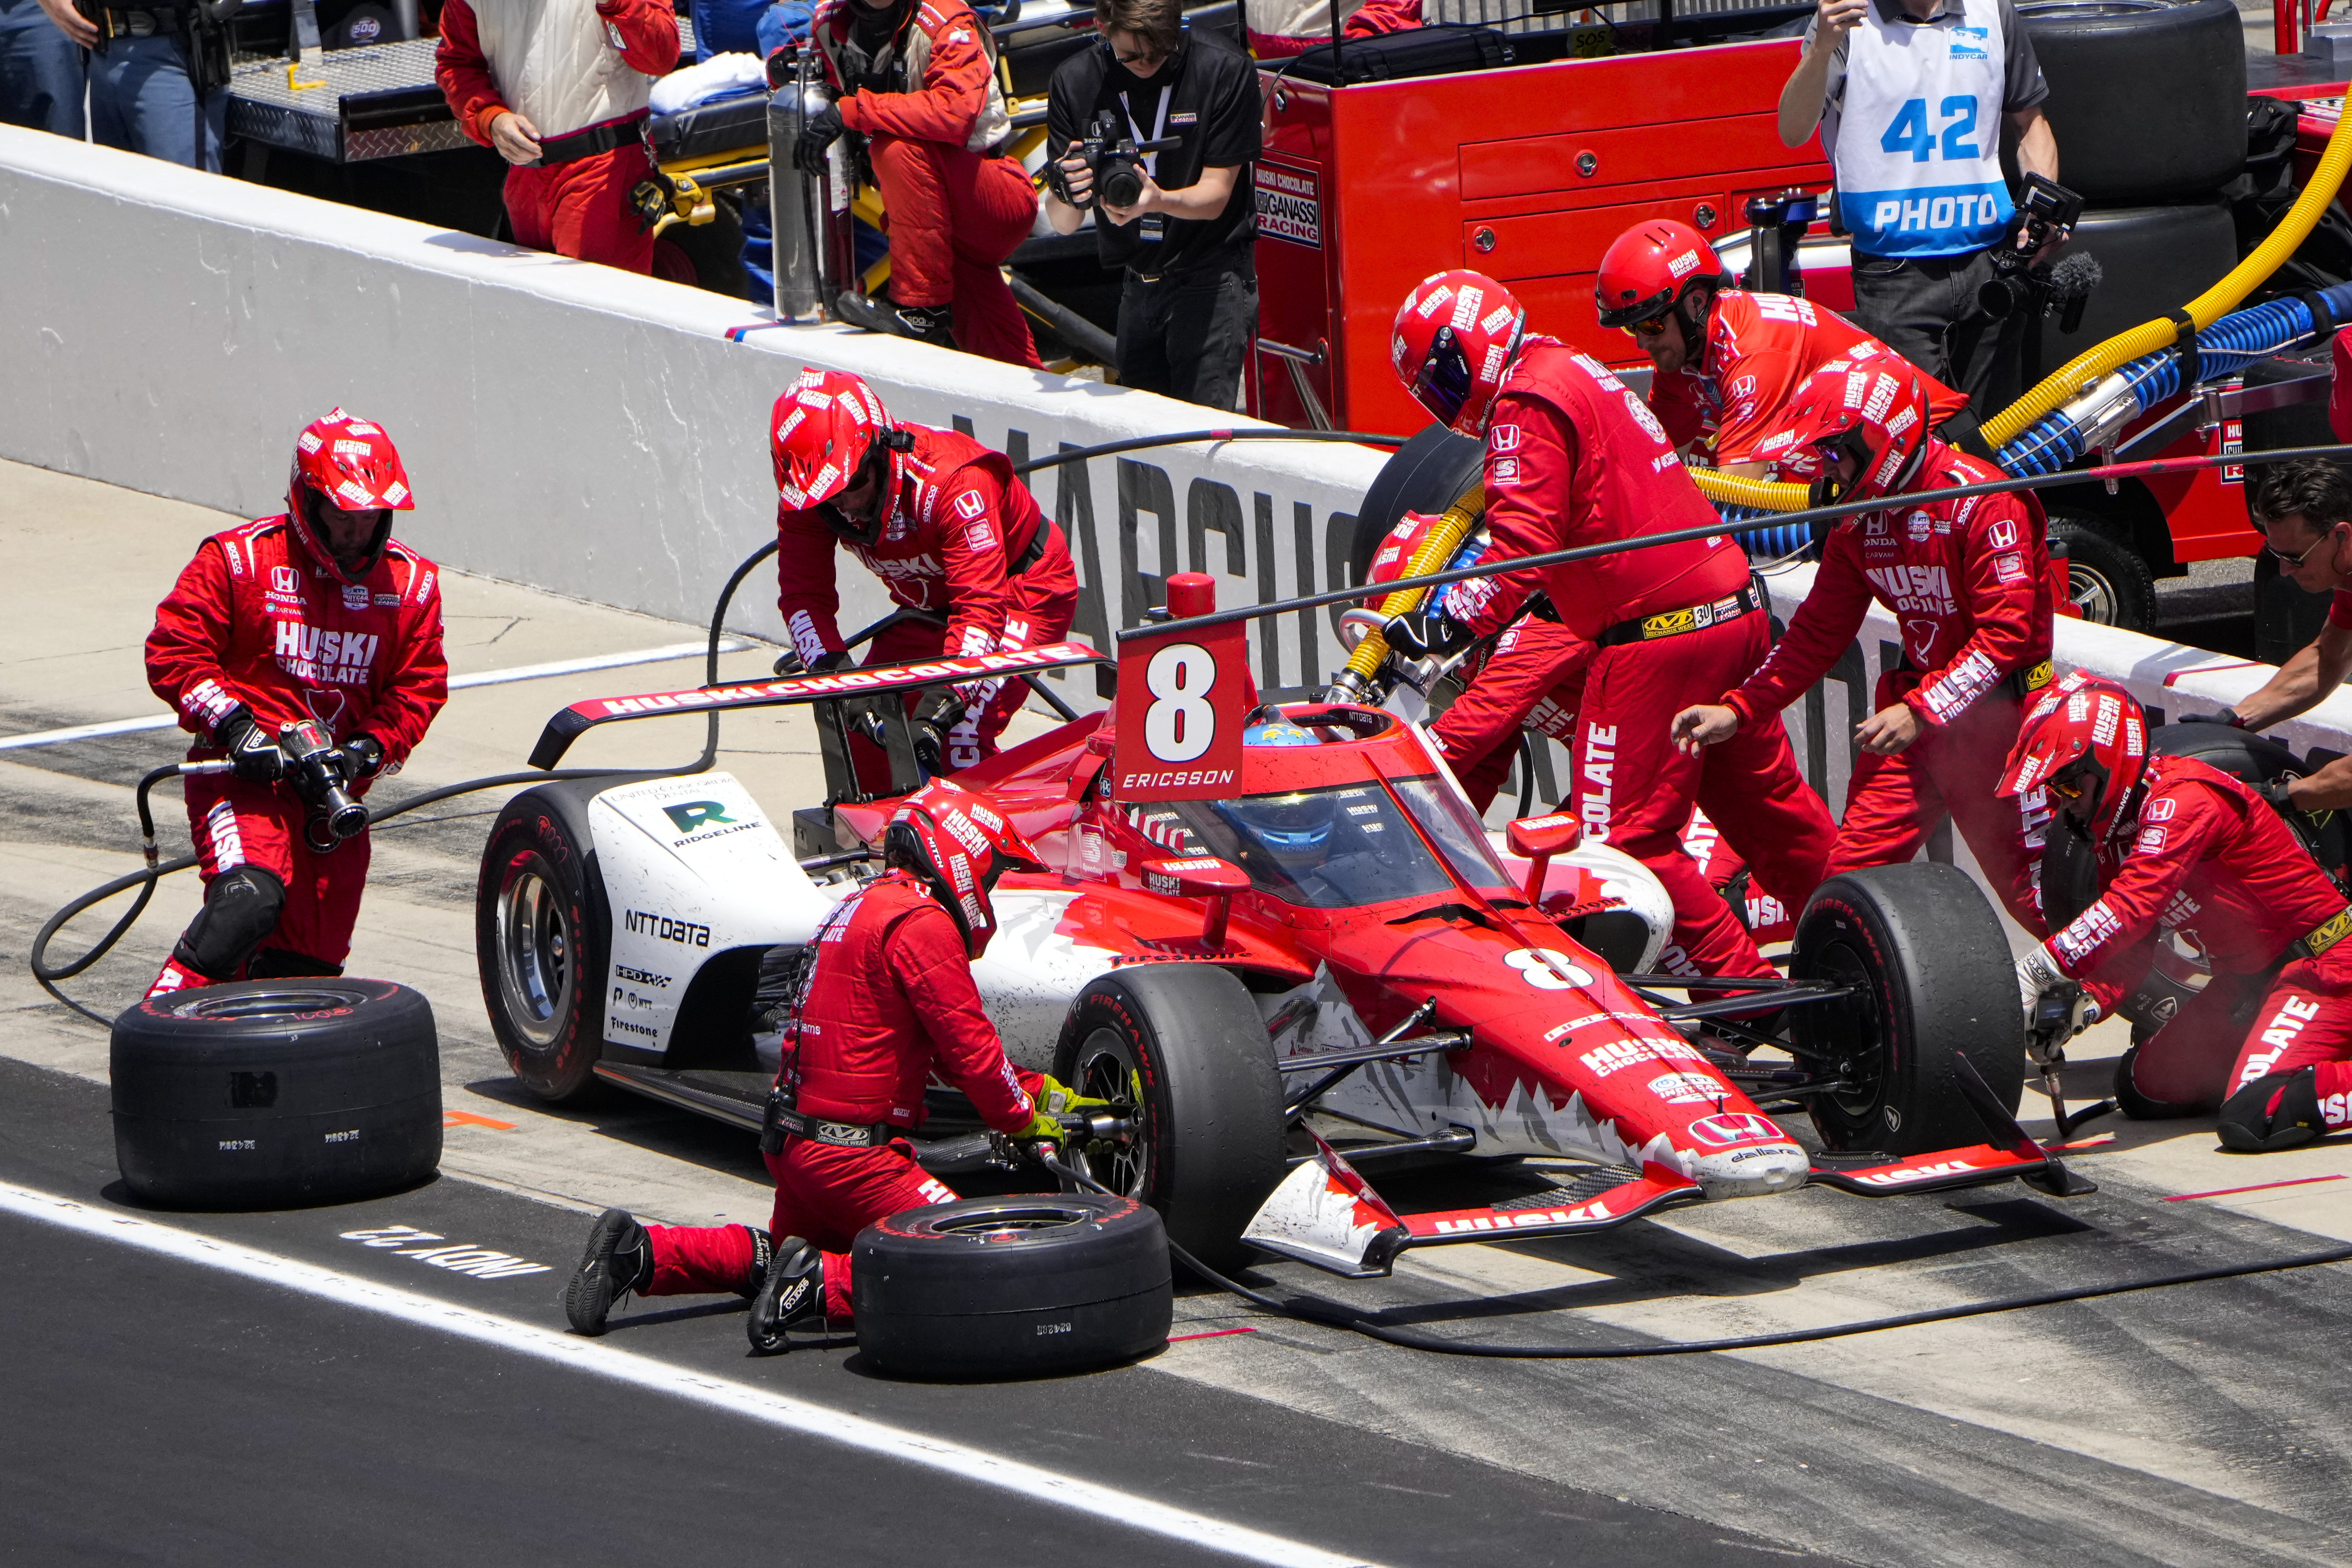 Sweden's Ericsson gives Ganassi another Indy 500 victory